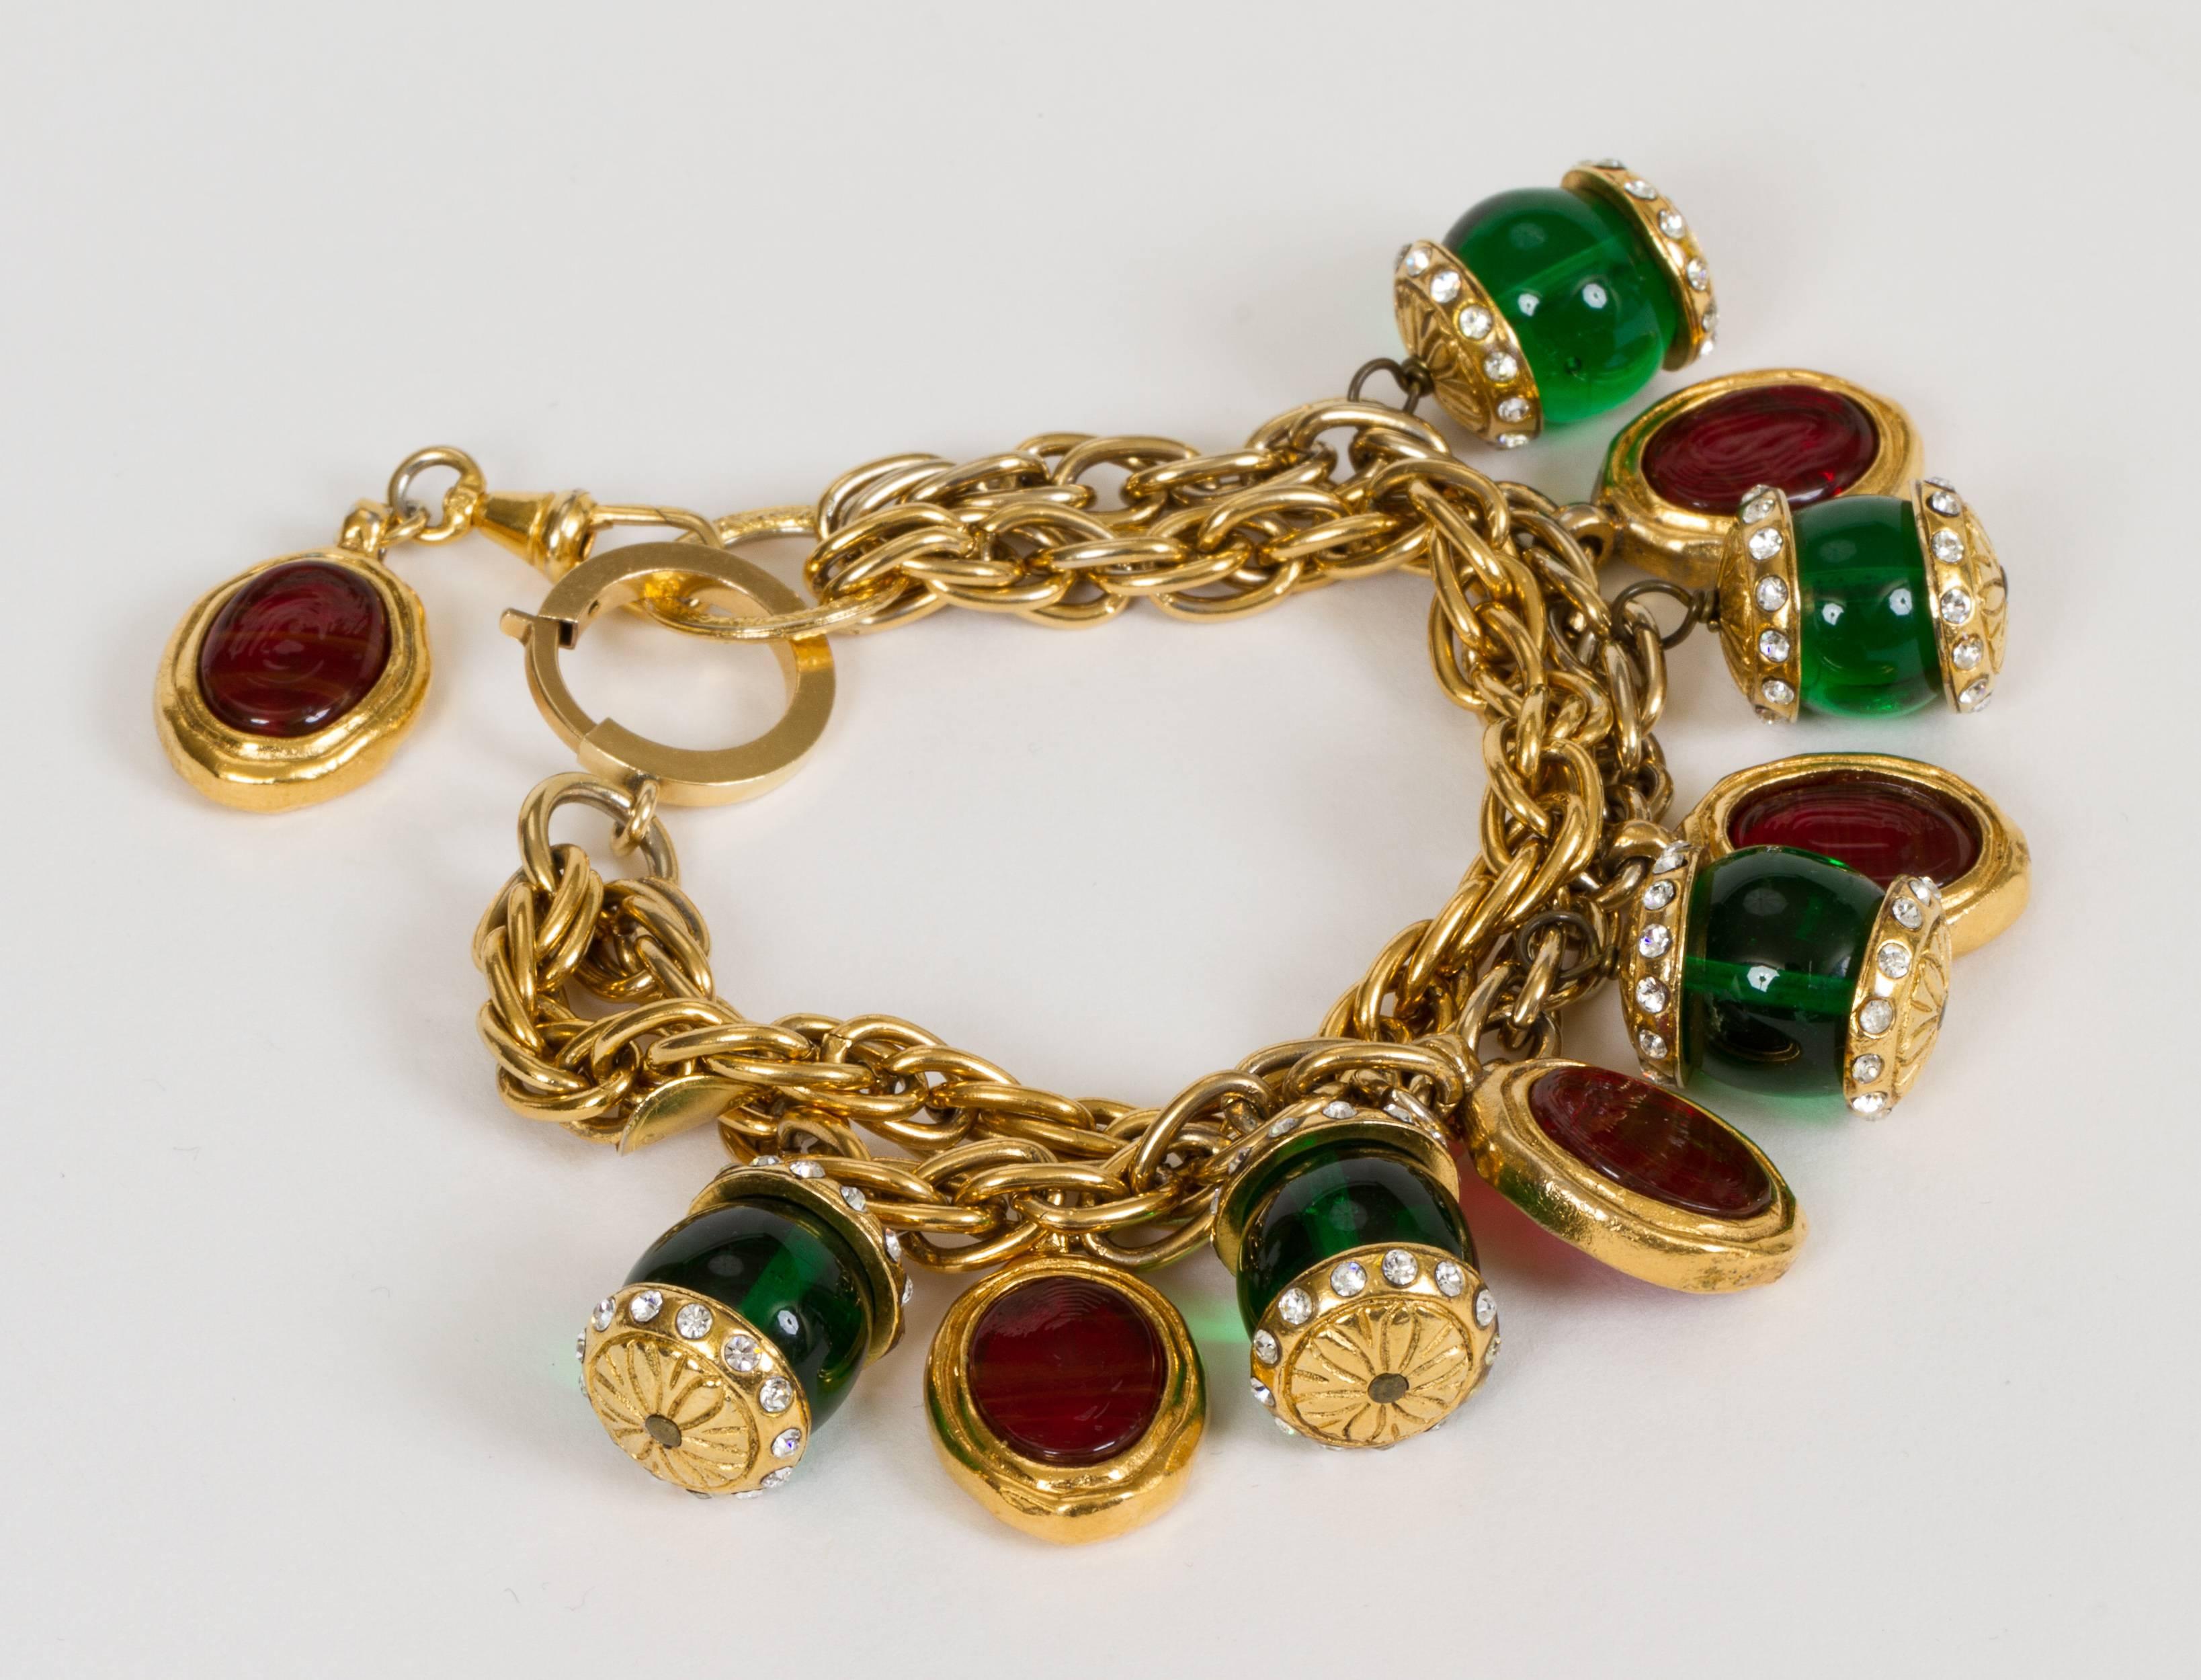 1970s Chanel double-strand bracelet with gripoix and crystal charms. Comes with velvet pouch.
